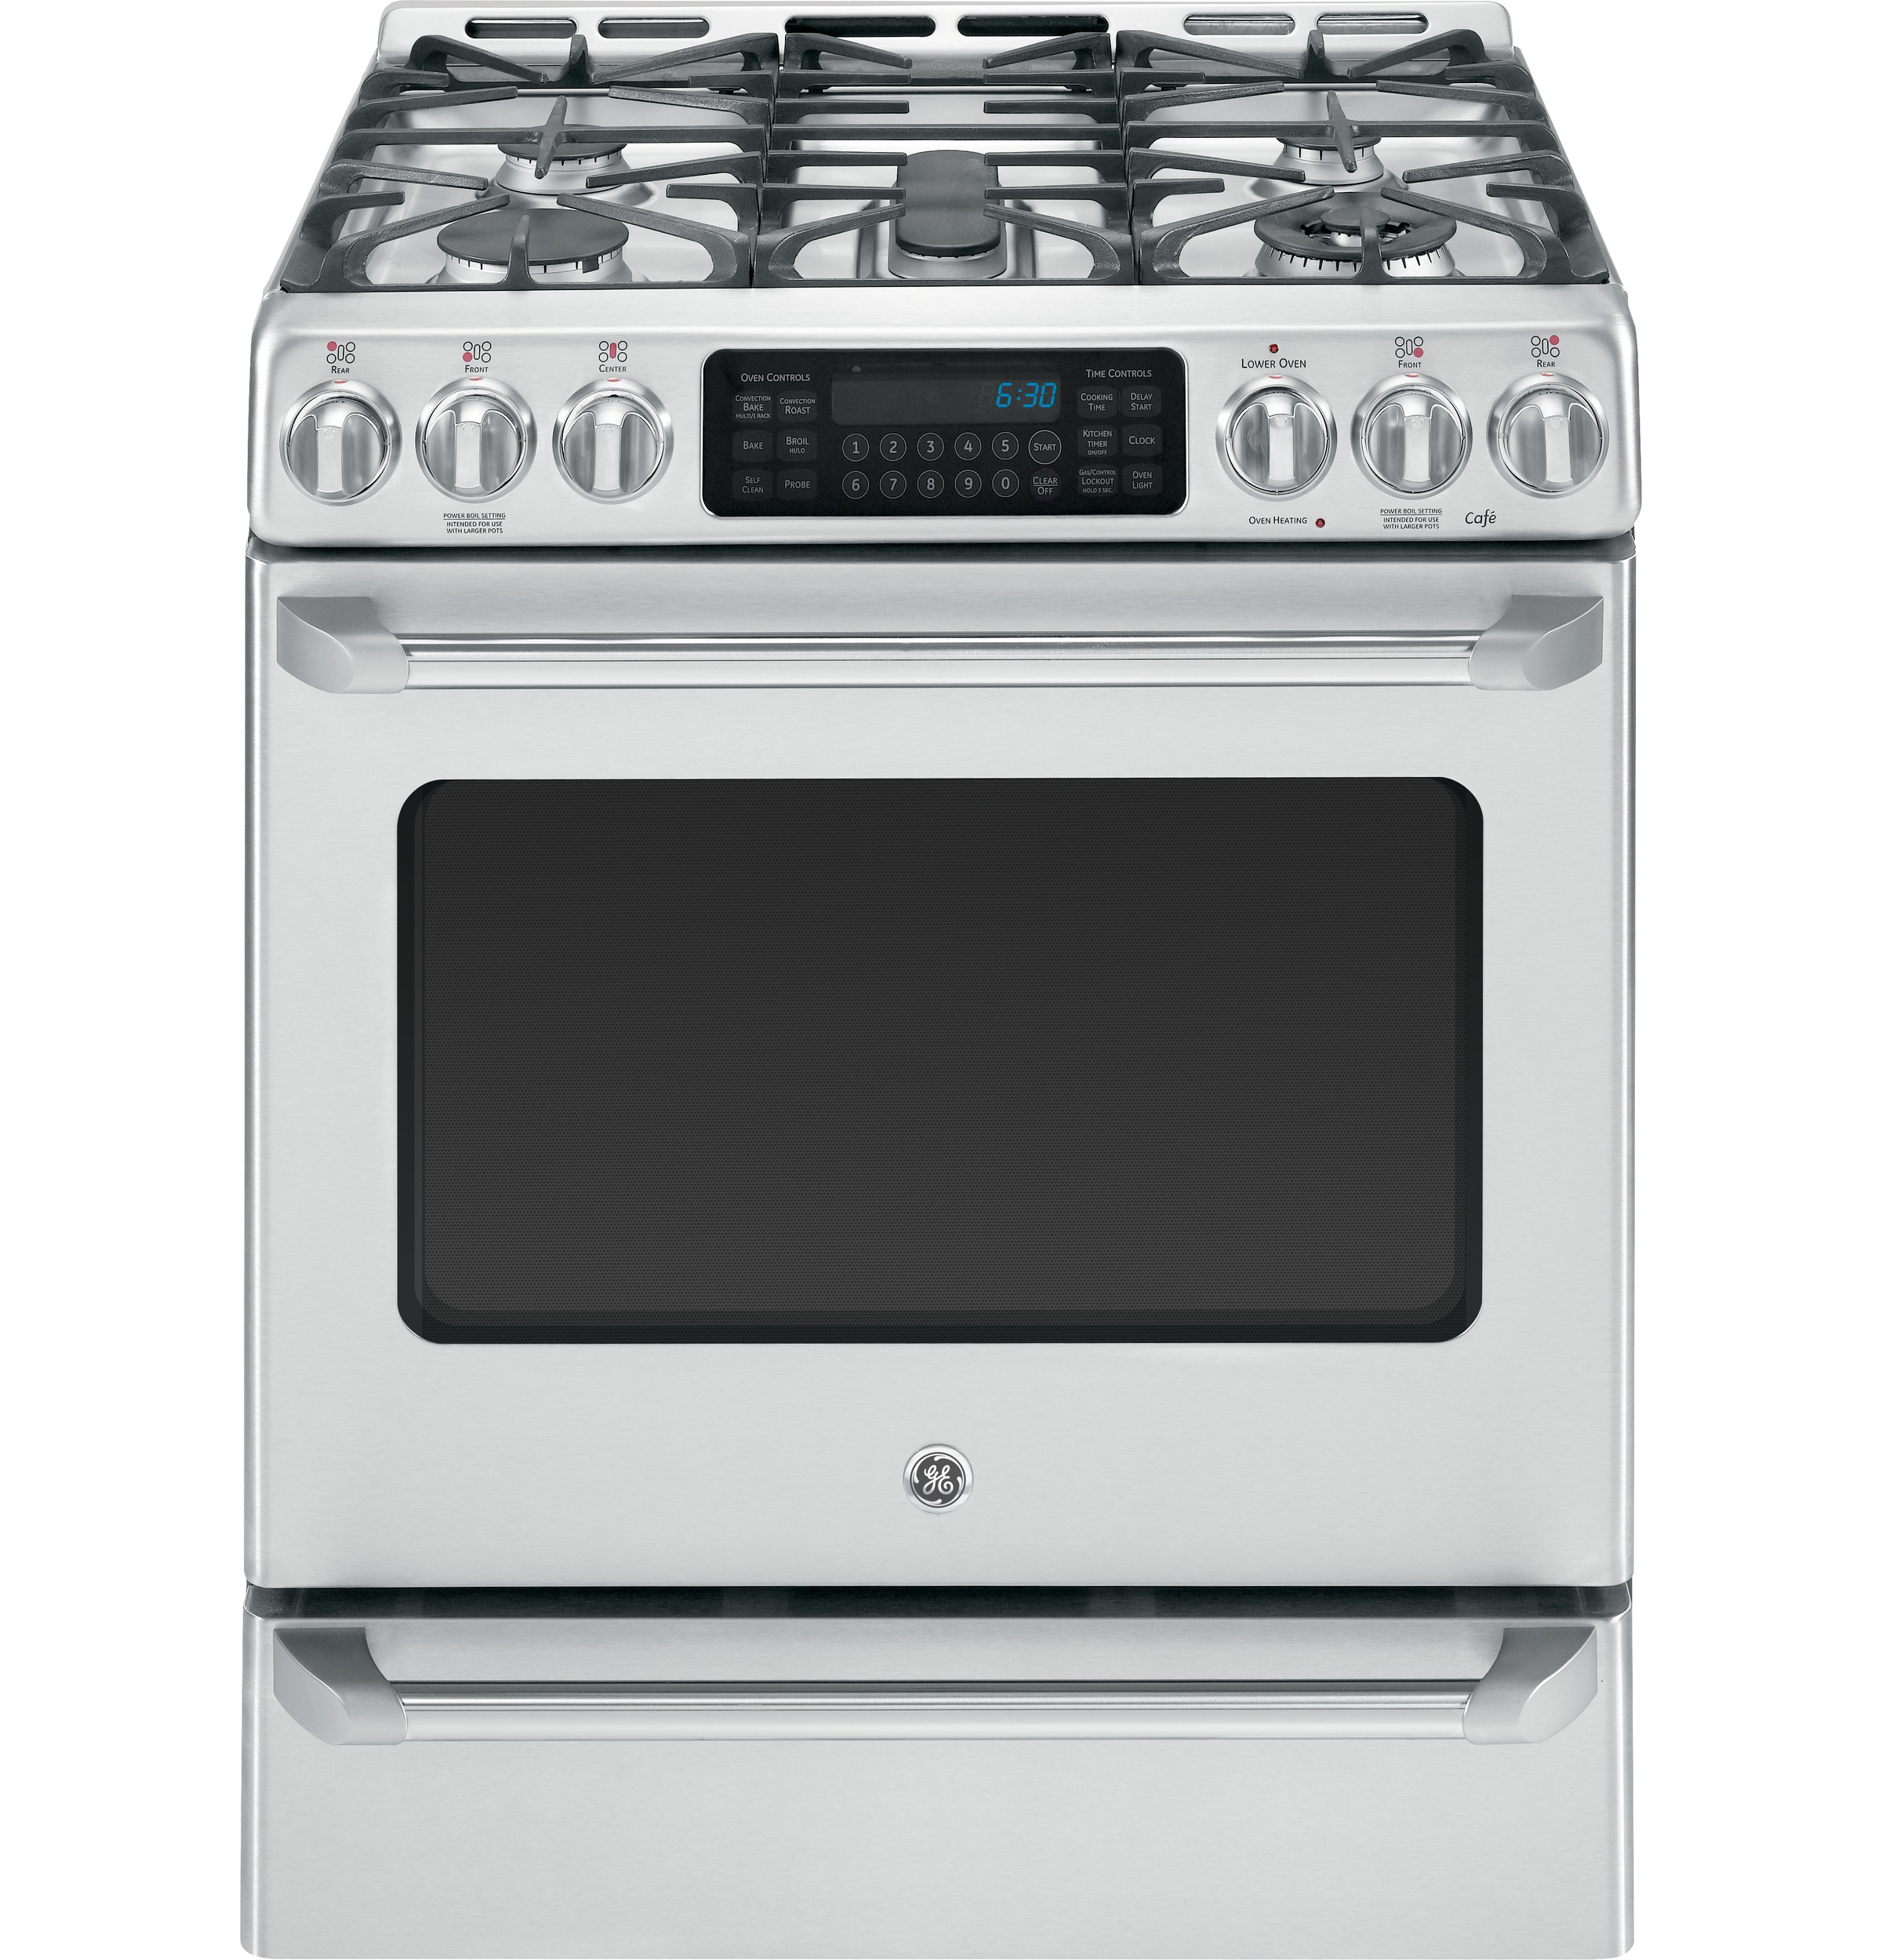 GE Cafe CGS985SETSS 6.4 cu. ft. Gas Range with SelfCleaning Convection Oven in Stainless Steel